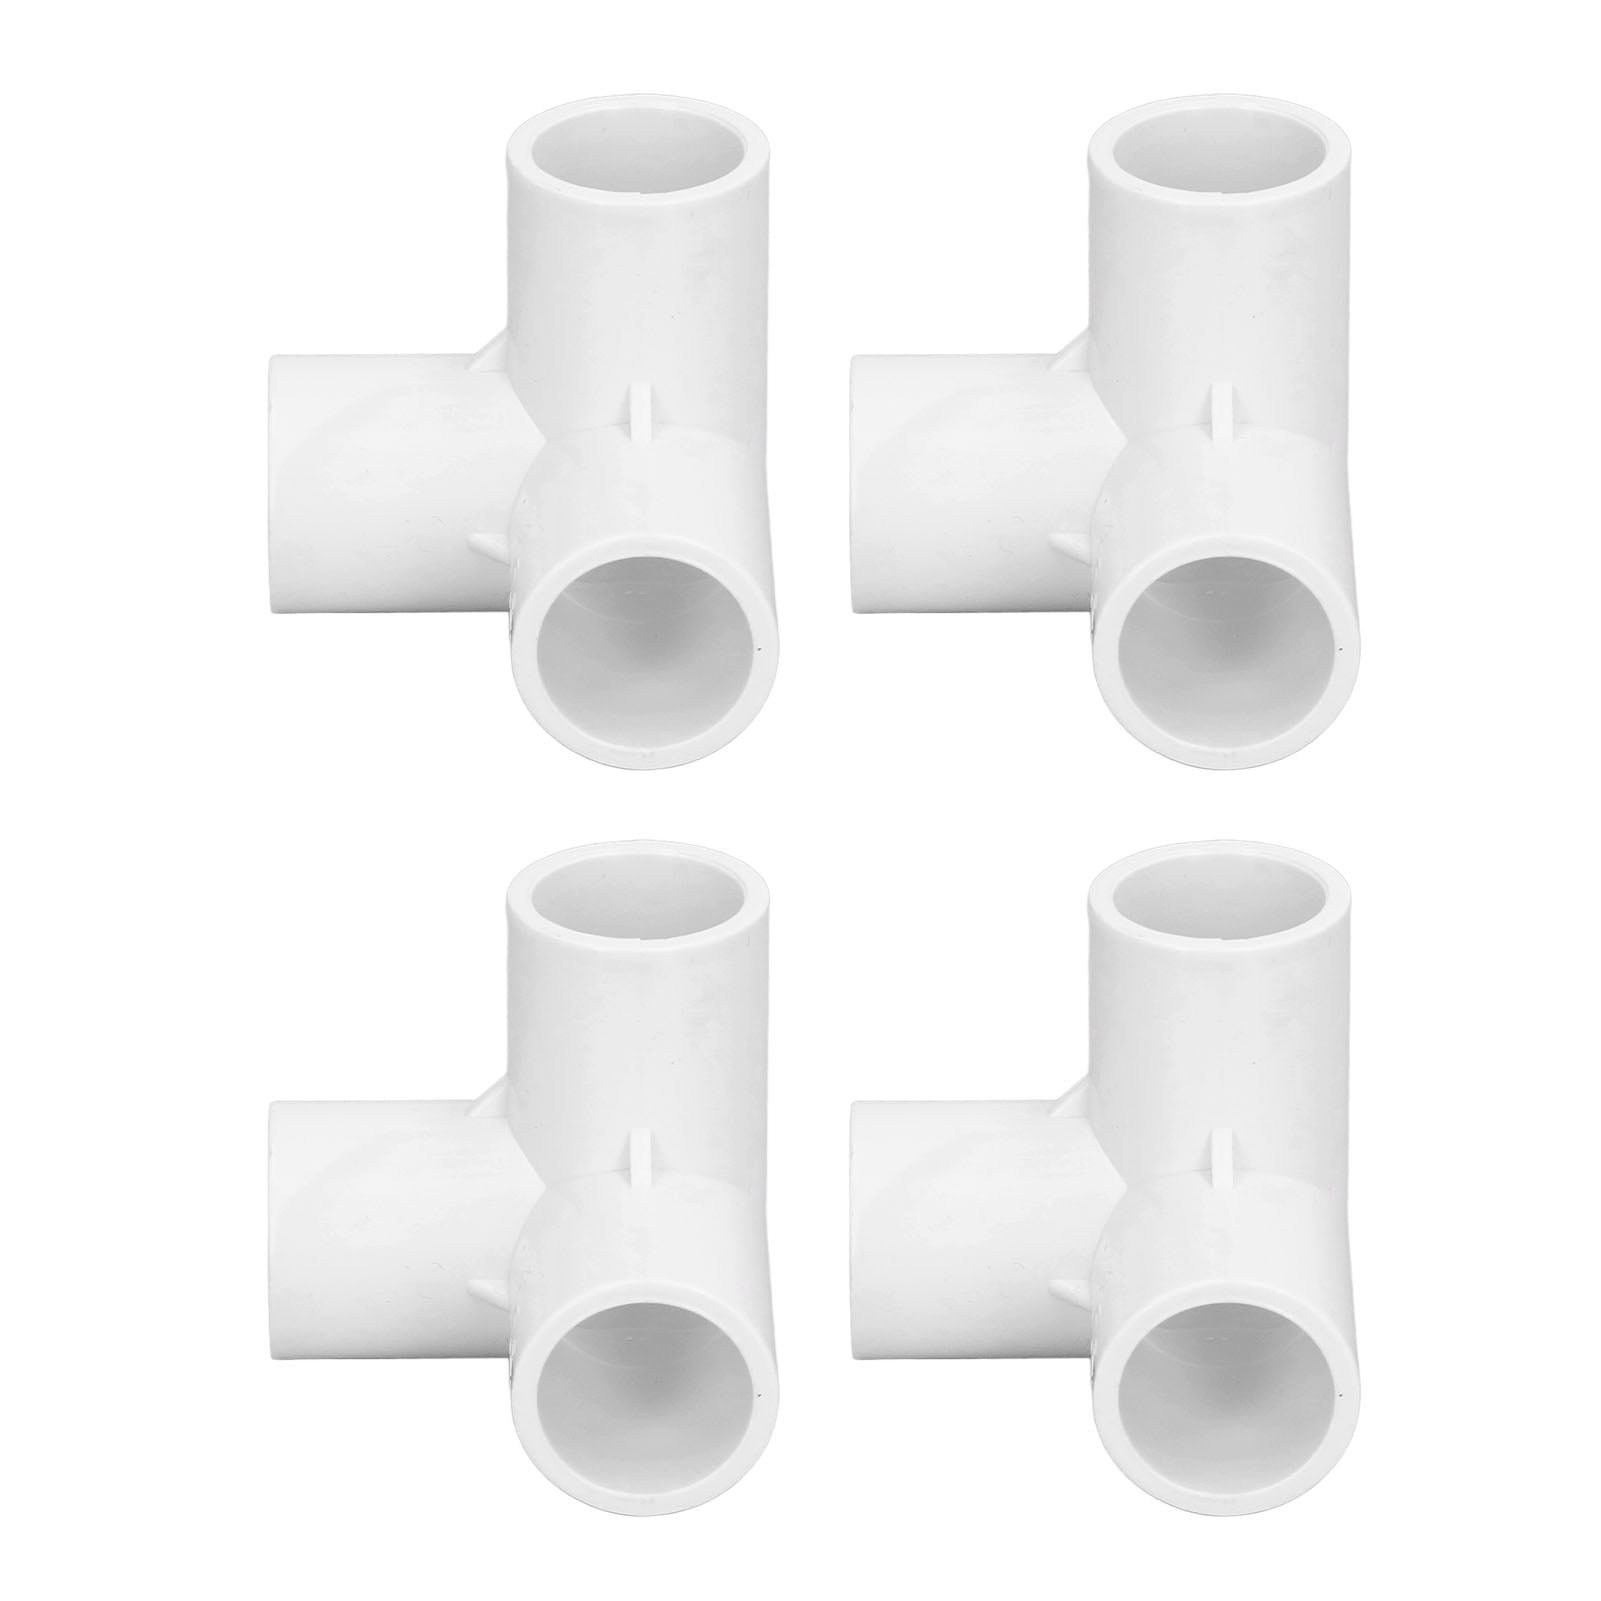 PVC Elbow Connector, 90 Degree Elbow 10PCS 3 Way Pipe Fittings 20mm ...